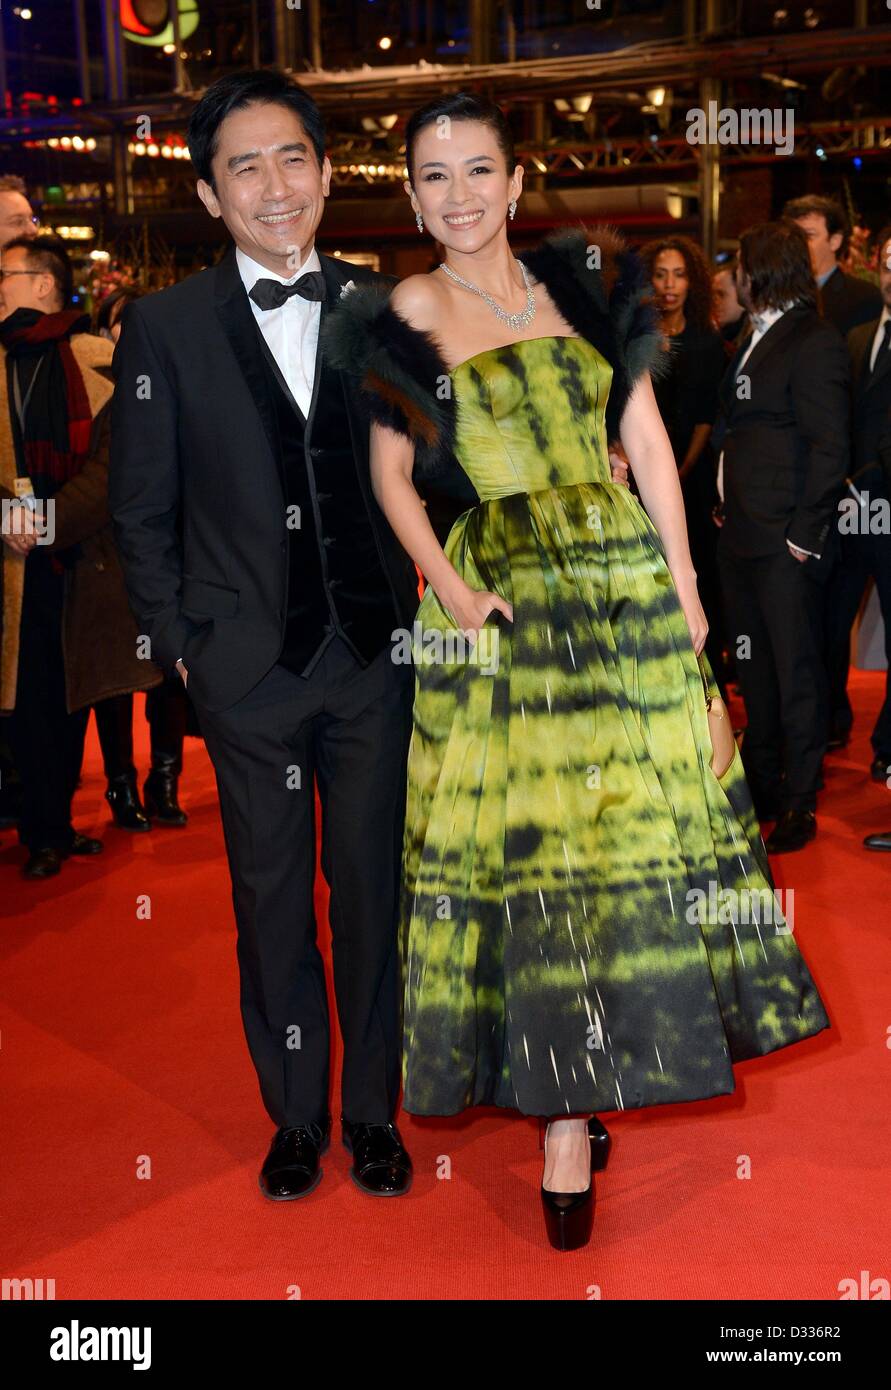 Chinese actors Zhang Ziyi (R) and Tony Leung Chiu Wai arrive for the premiere of the movie 'The Grandmaster' ('Yi dai zong shi') during the 63rd annual Berlin International Film Festival, in Berlin, Germany, 07 February 2013. The movie has been selected as the opening film for the Berlinale and is running in the offical section out of competition. Photo: Britta Pedersen/dpa Stock Photo